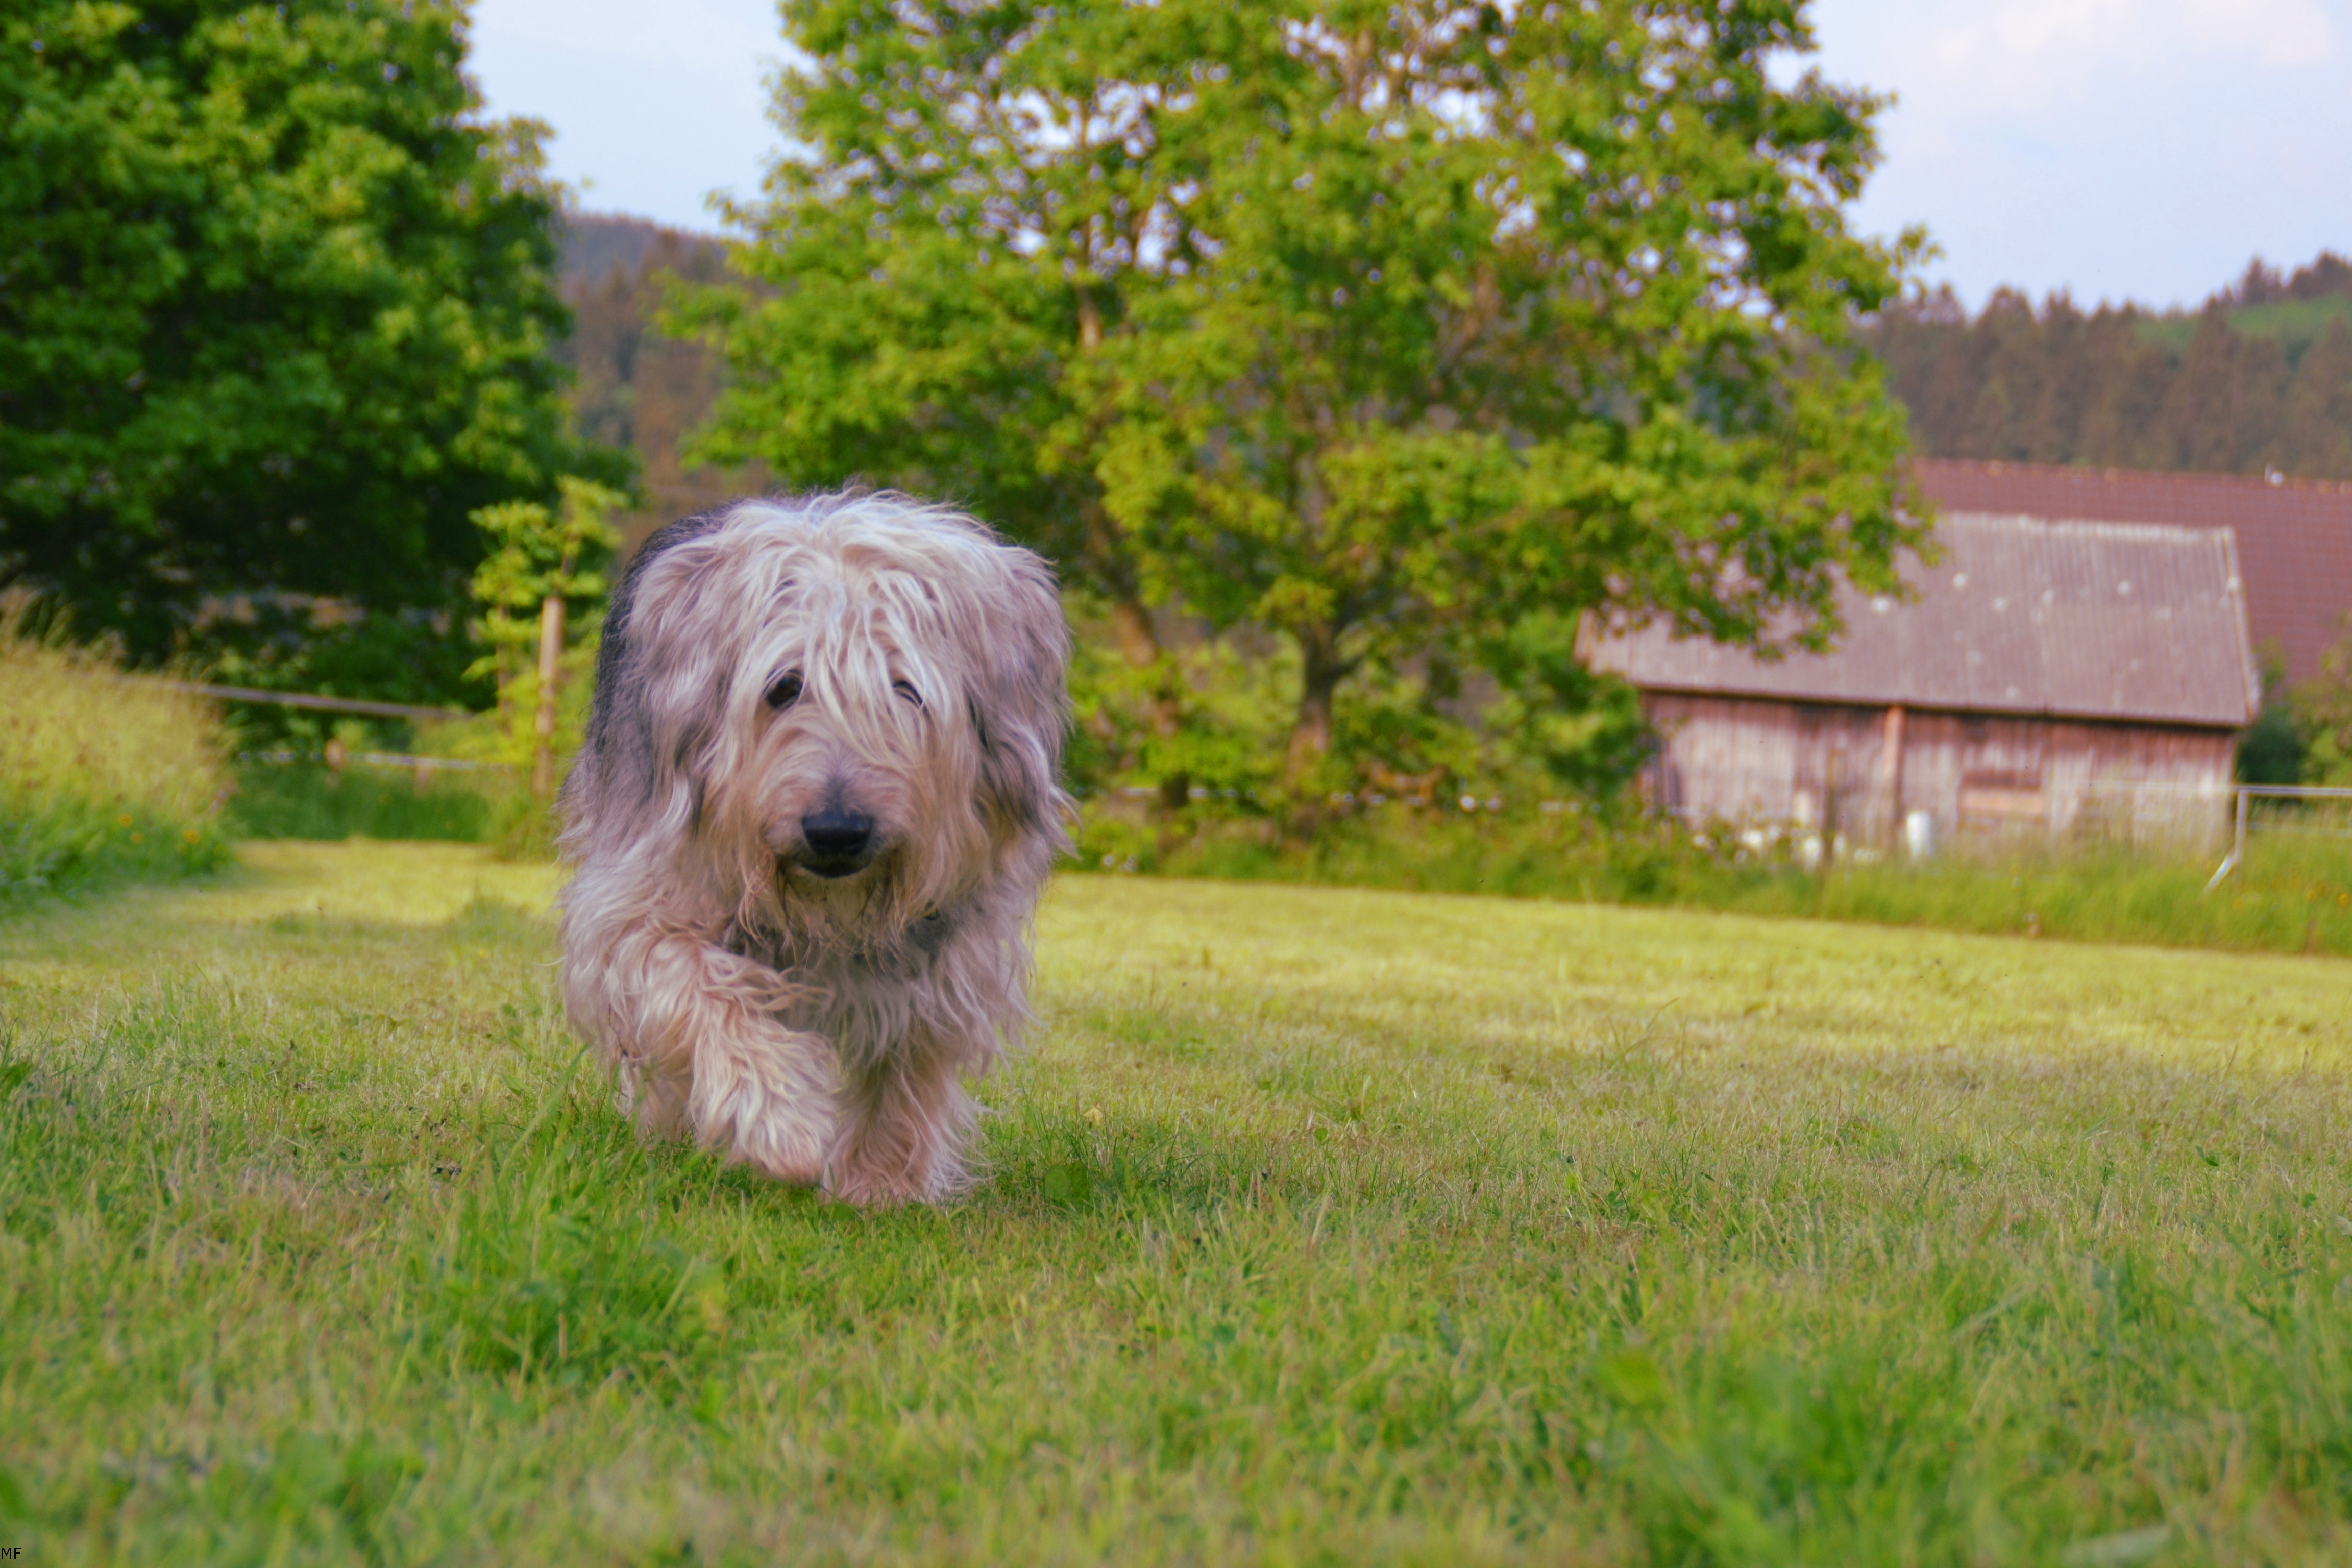 Brown gray and white hairy medium size dog walking on green grass field during daytime photo